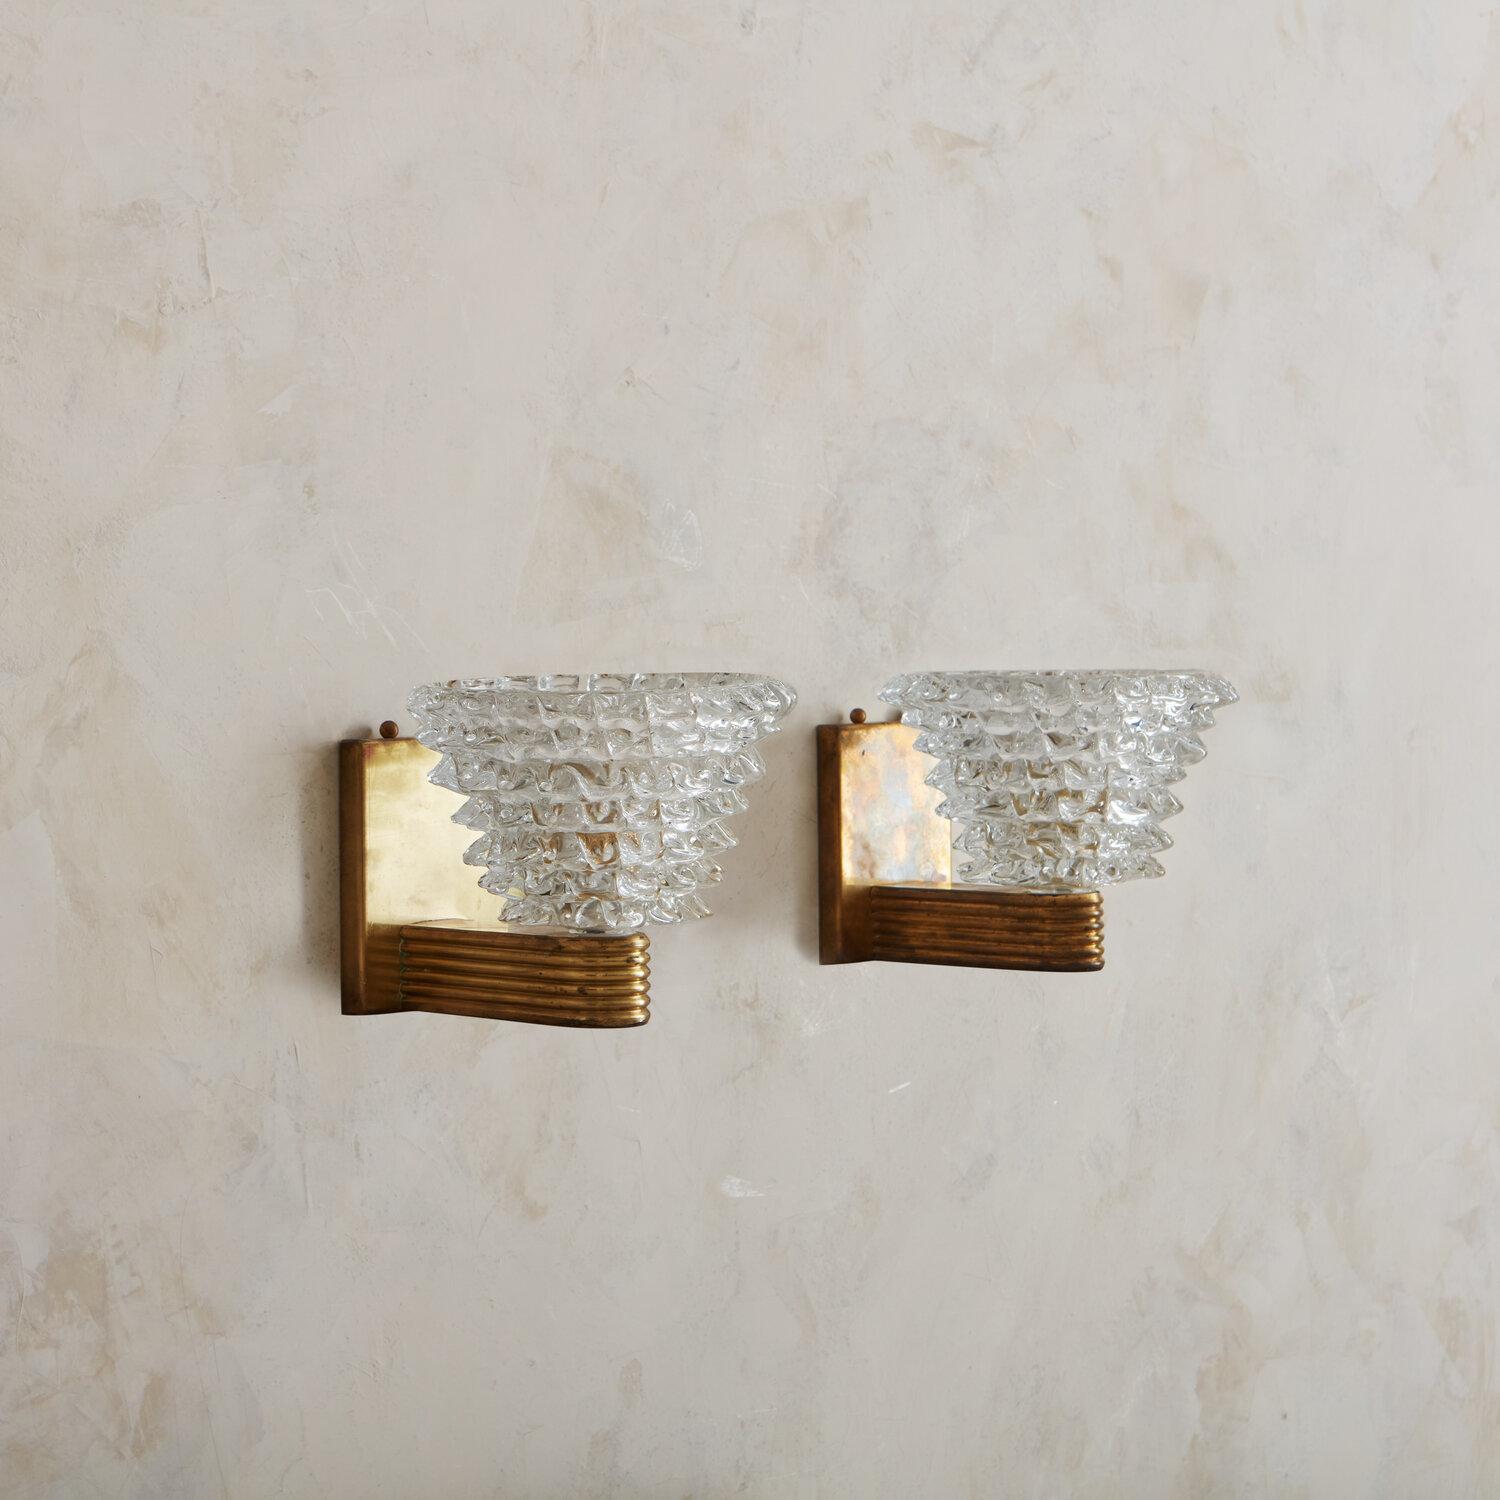 Mid-Century Modern Pair of Italian Handblown Glass Sconces with Brass Bases